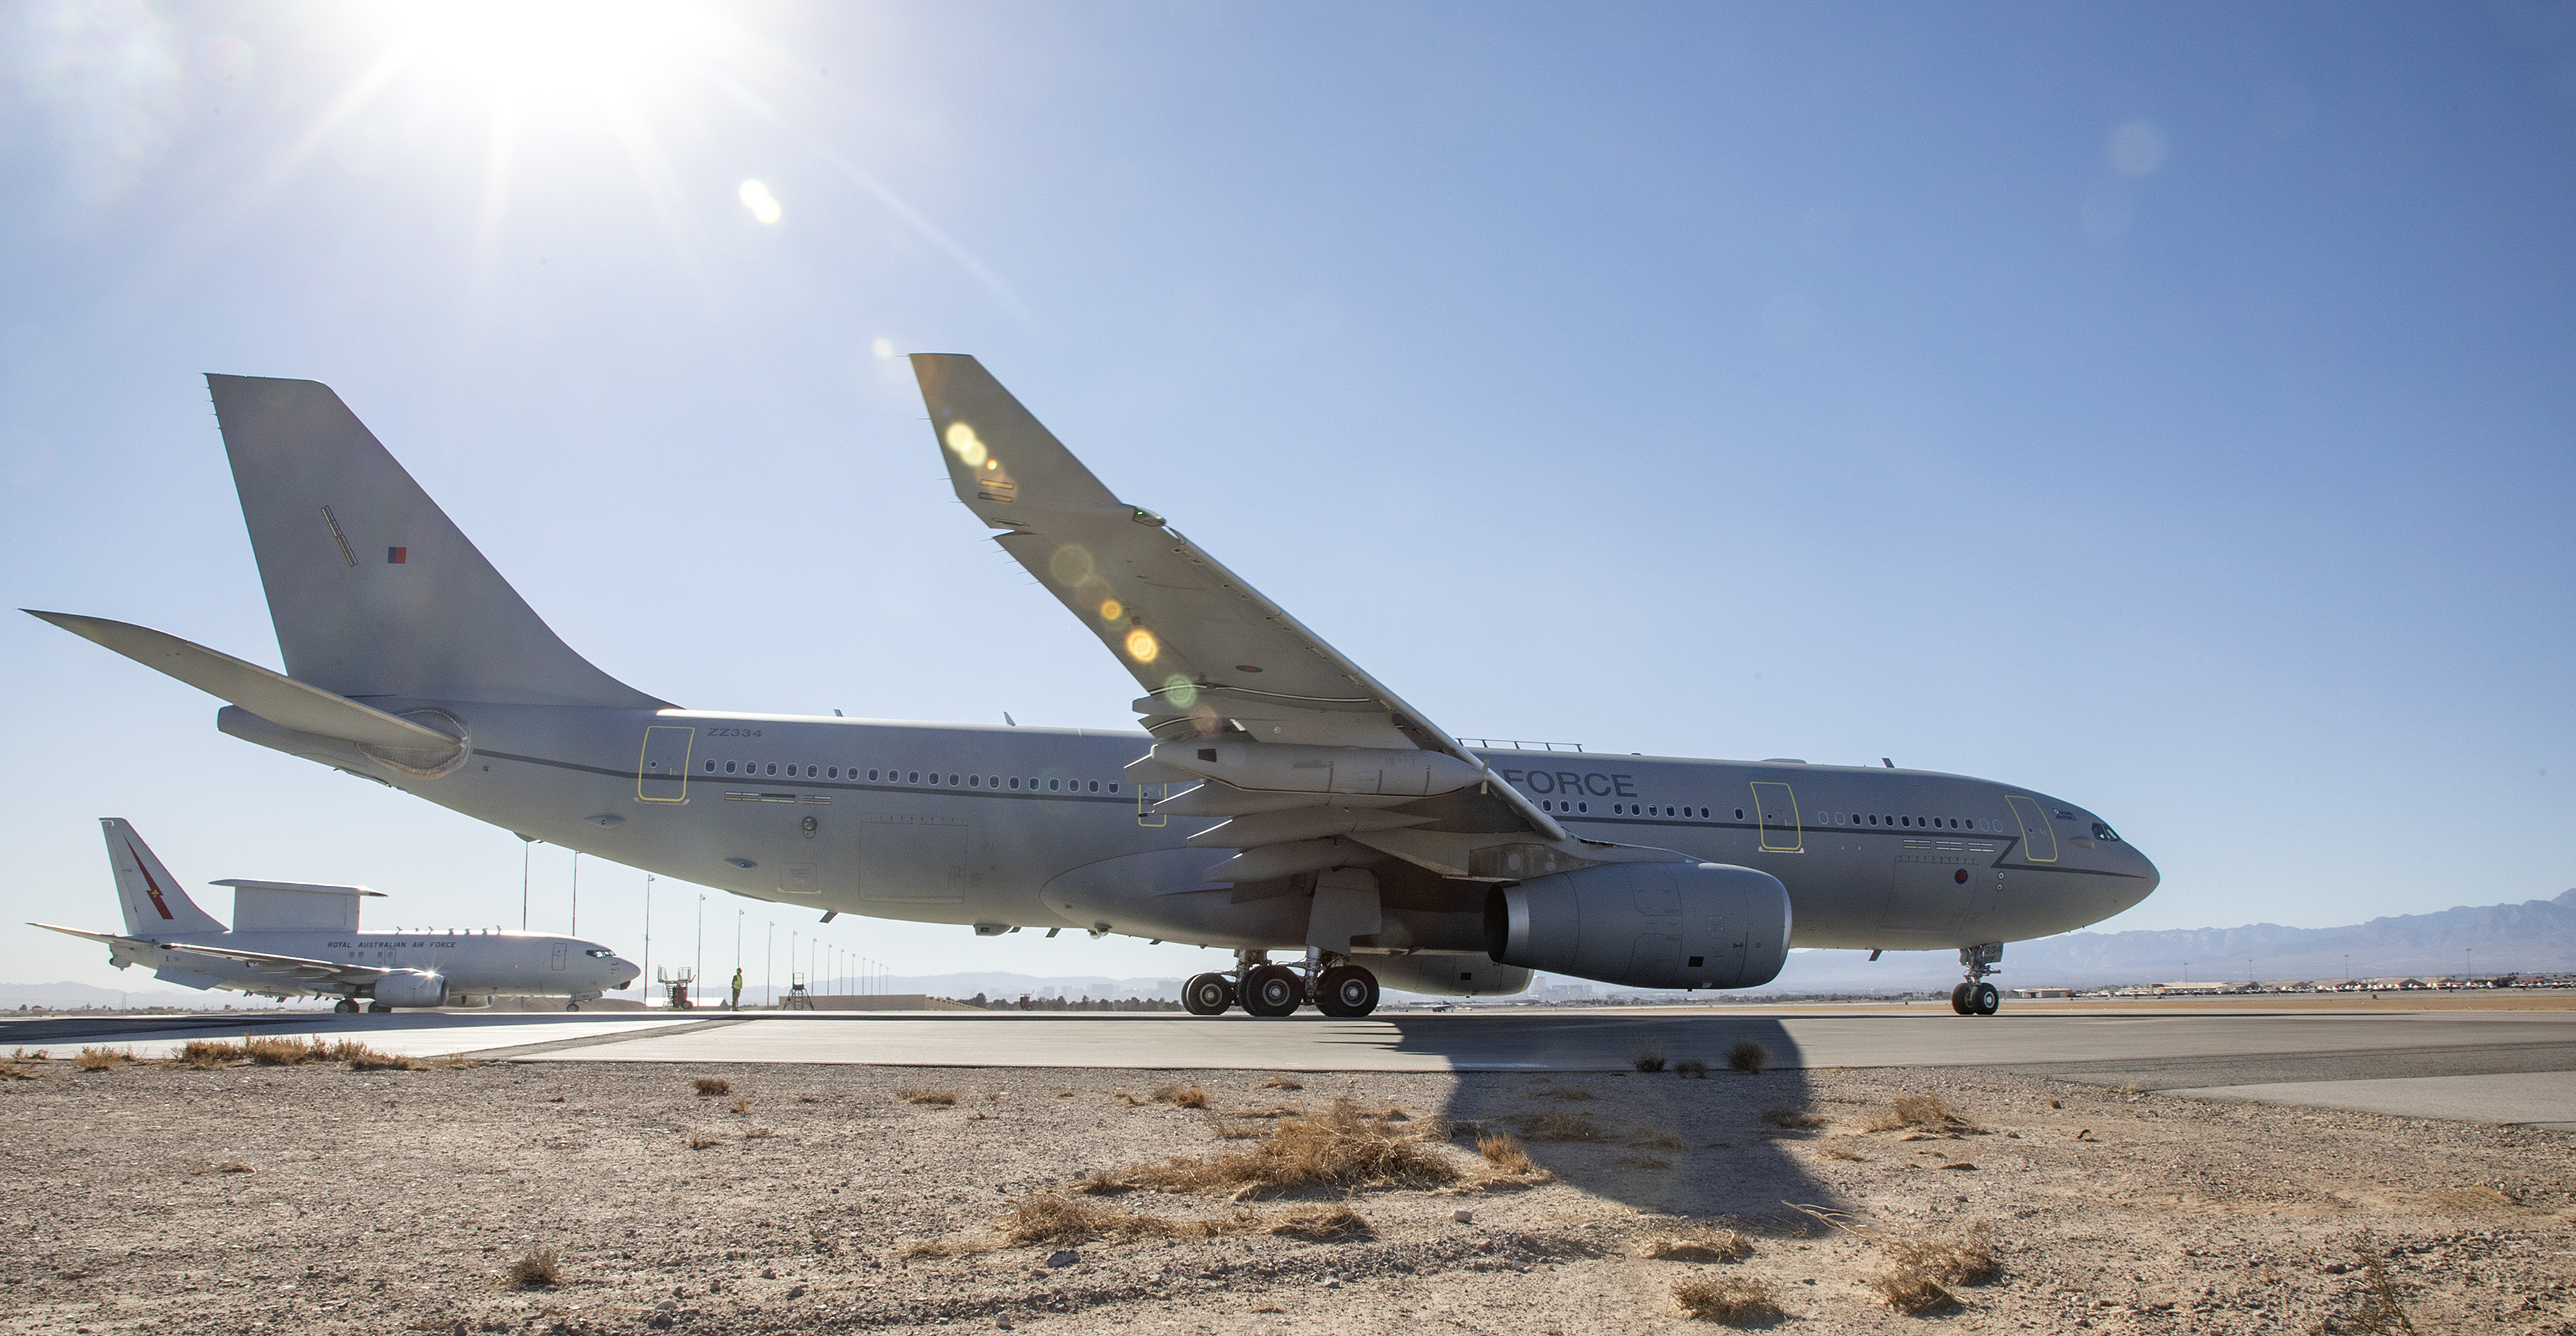 A Royal Air Force Brize Norton based Voyager is providing a key part of Exercise Red Flag, the ongoing major exercise run by the United States Air Force in Nevada